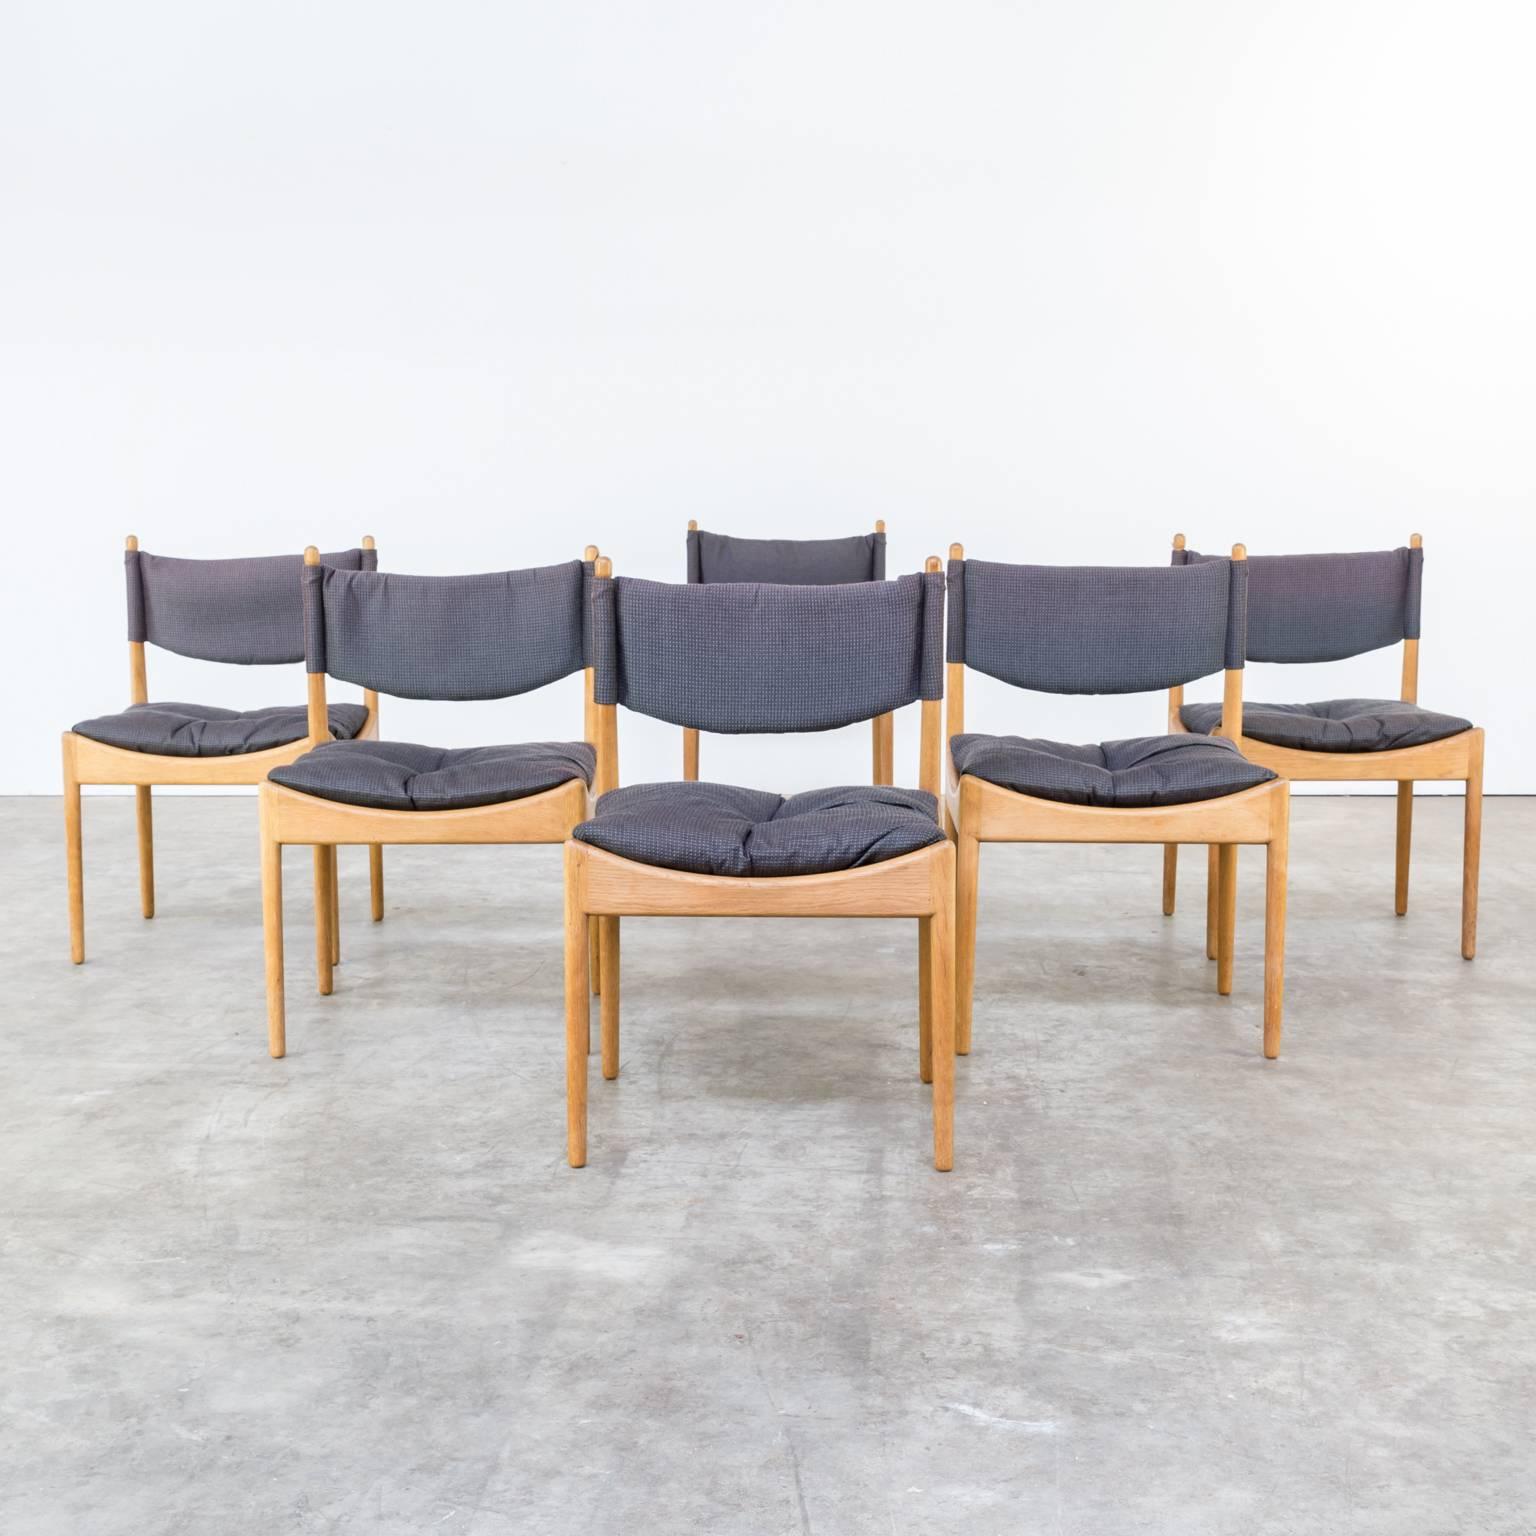 One set of six 1960s Kristian Solmer Vedel dining chairs for Soren Willadsen. Grey fabric, oak frame. Good condition, wear consistant with age and use. Dimensions: 49cm (W) x 44cm (D) x 79cm (H) seat 41cm.